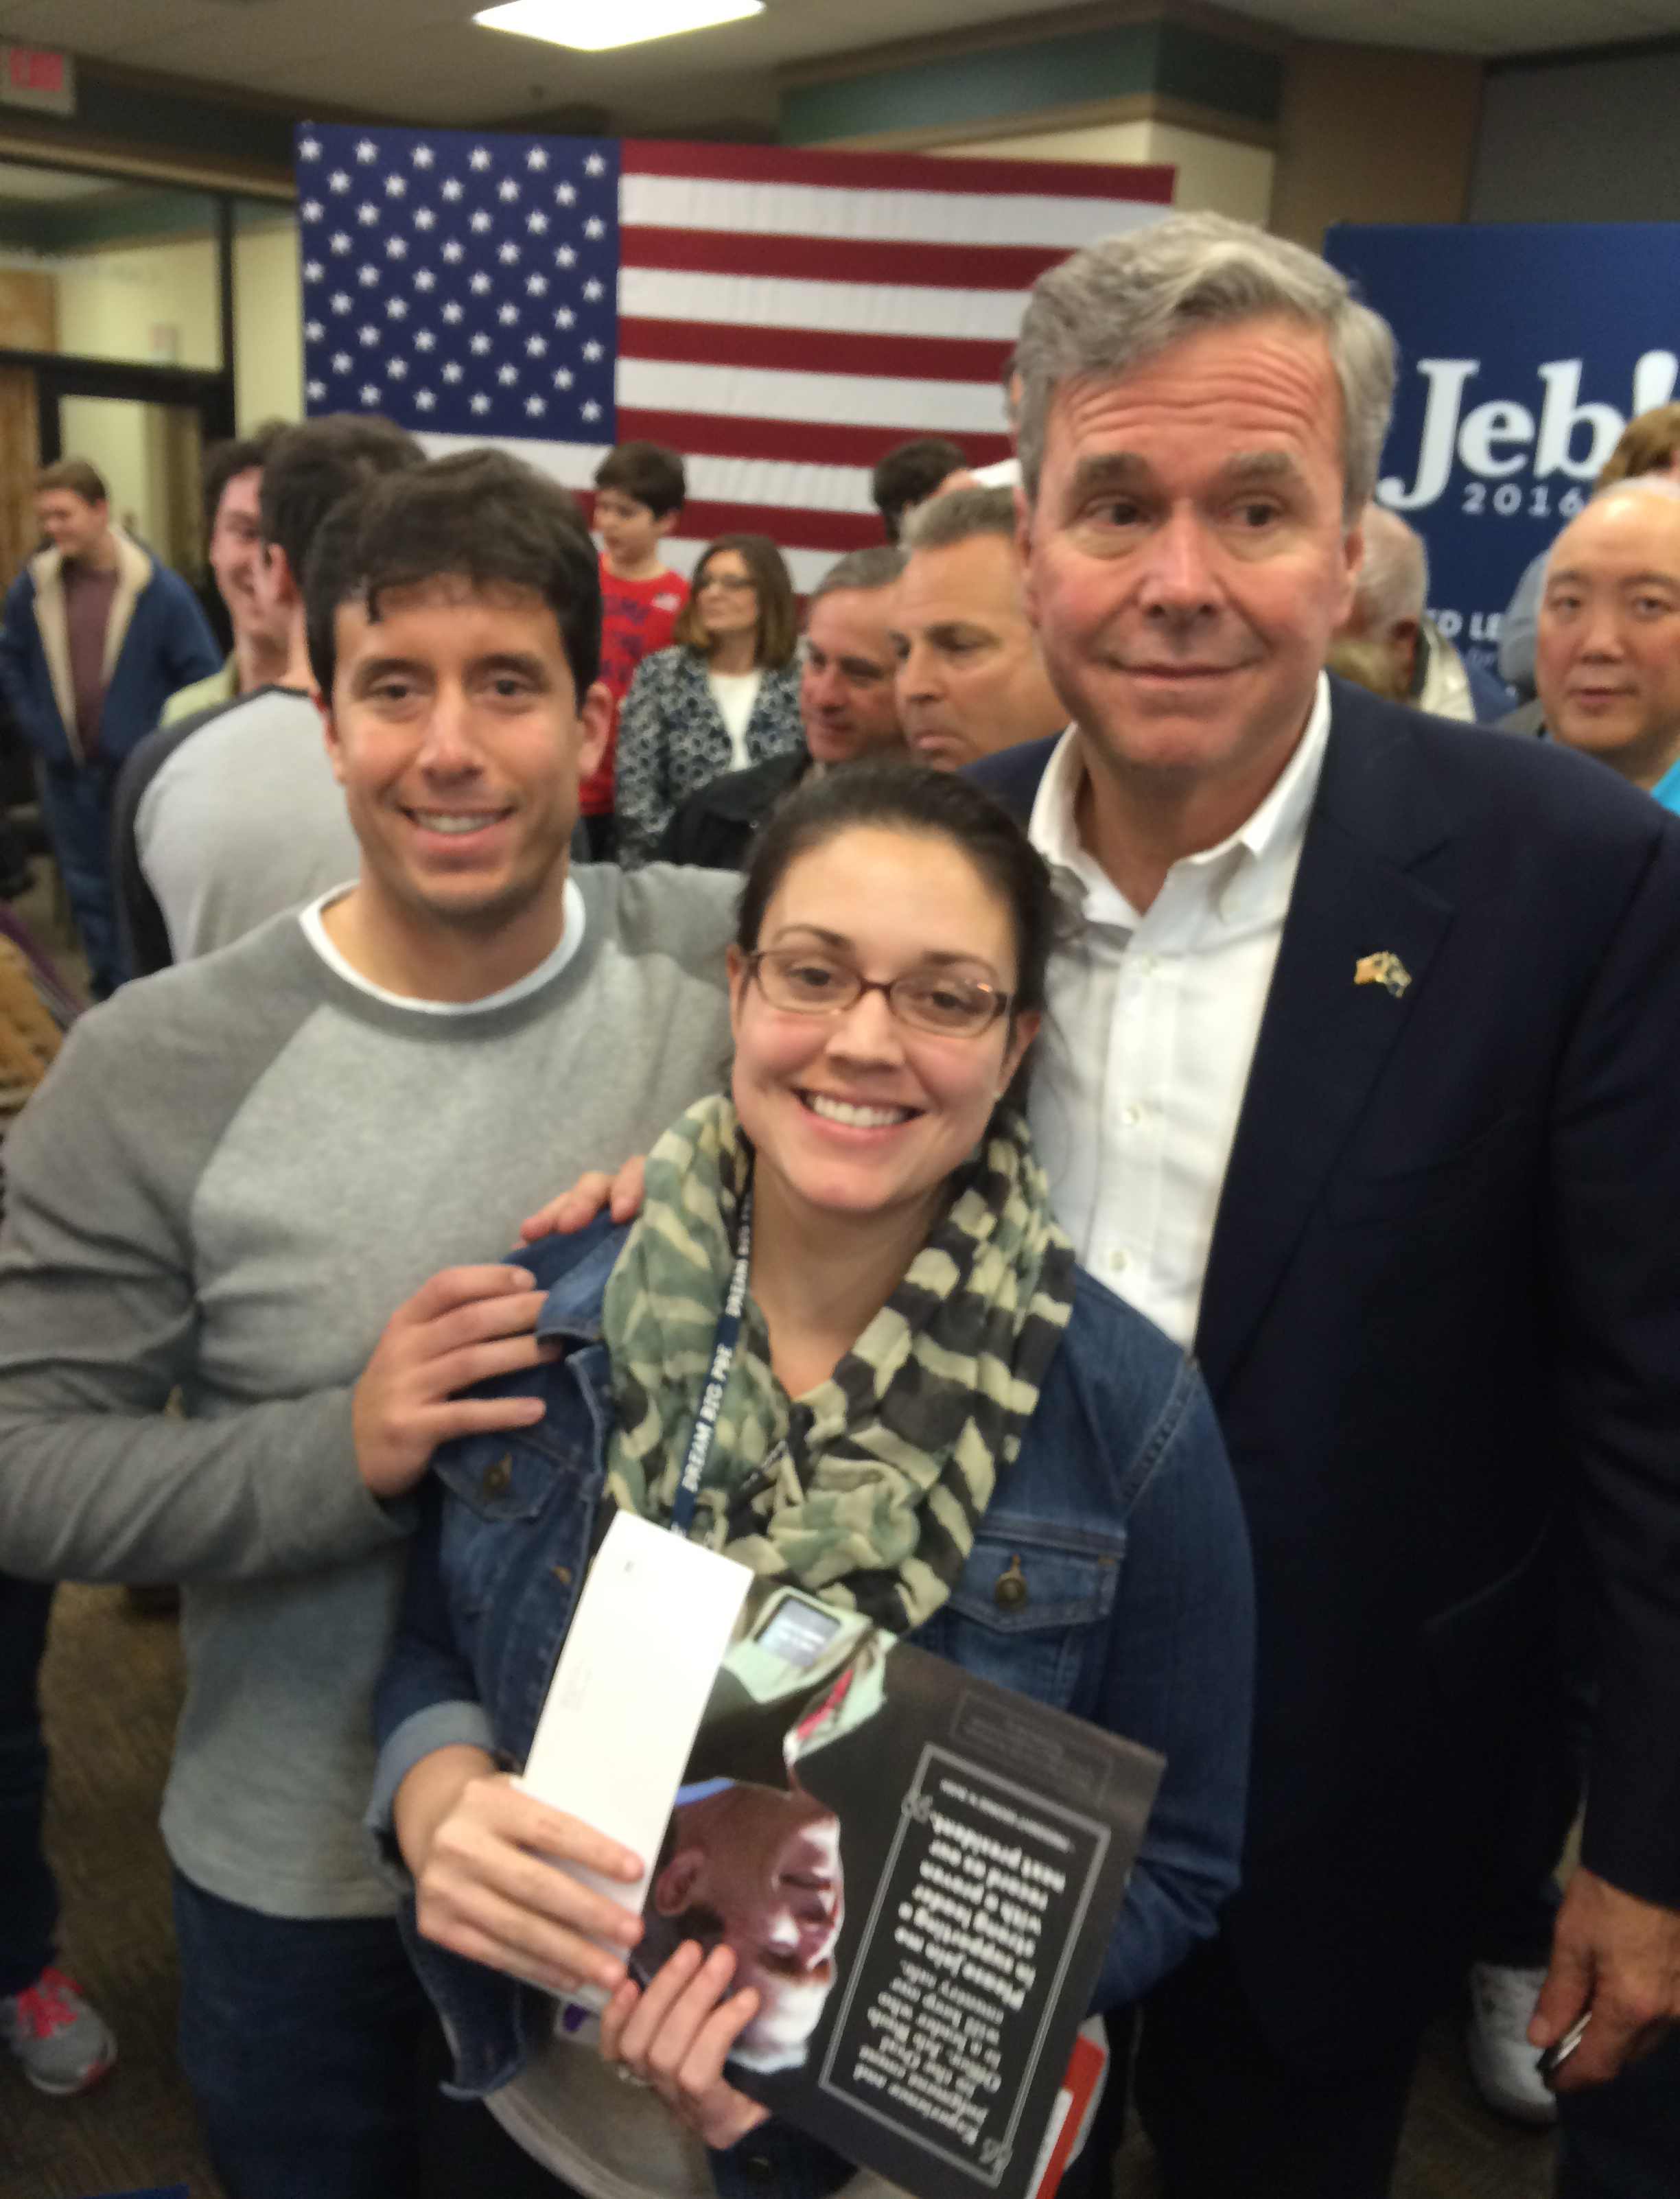 Here we are with Jeb. The event, and Jeb himself, were a little disorganized.